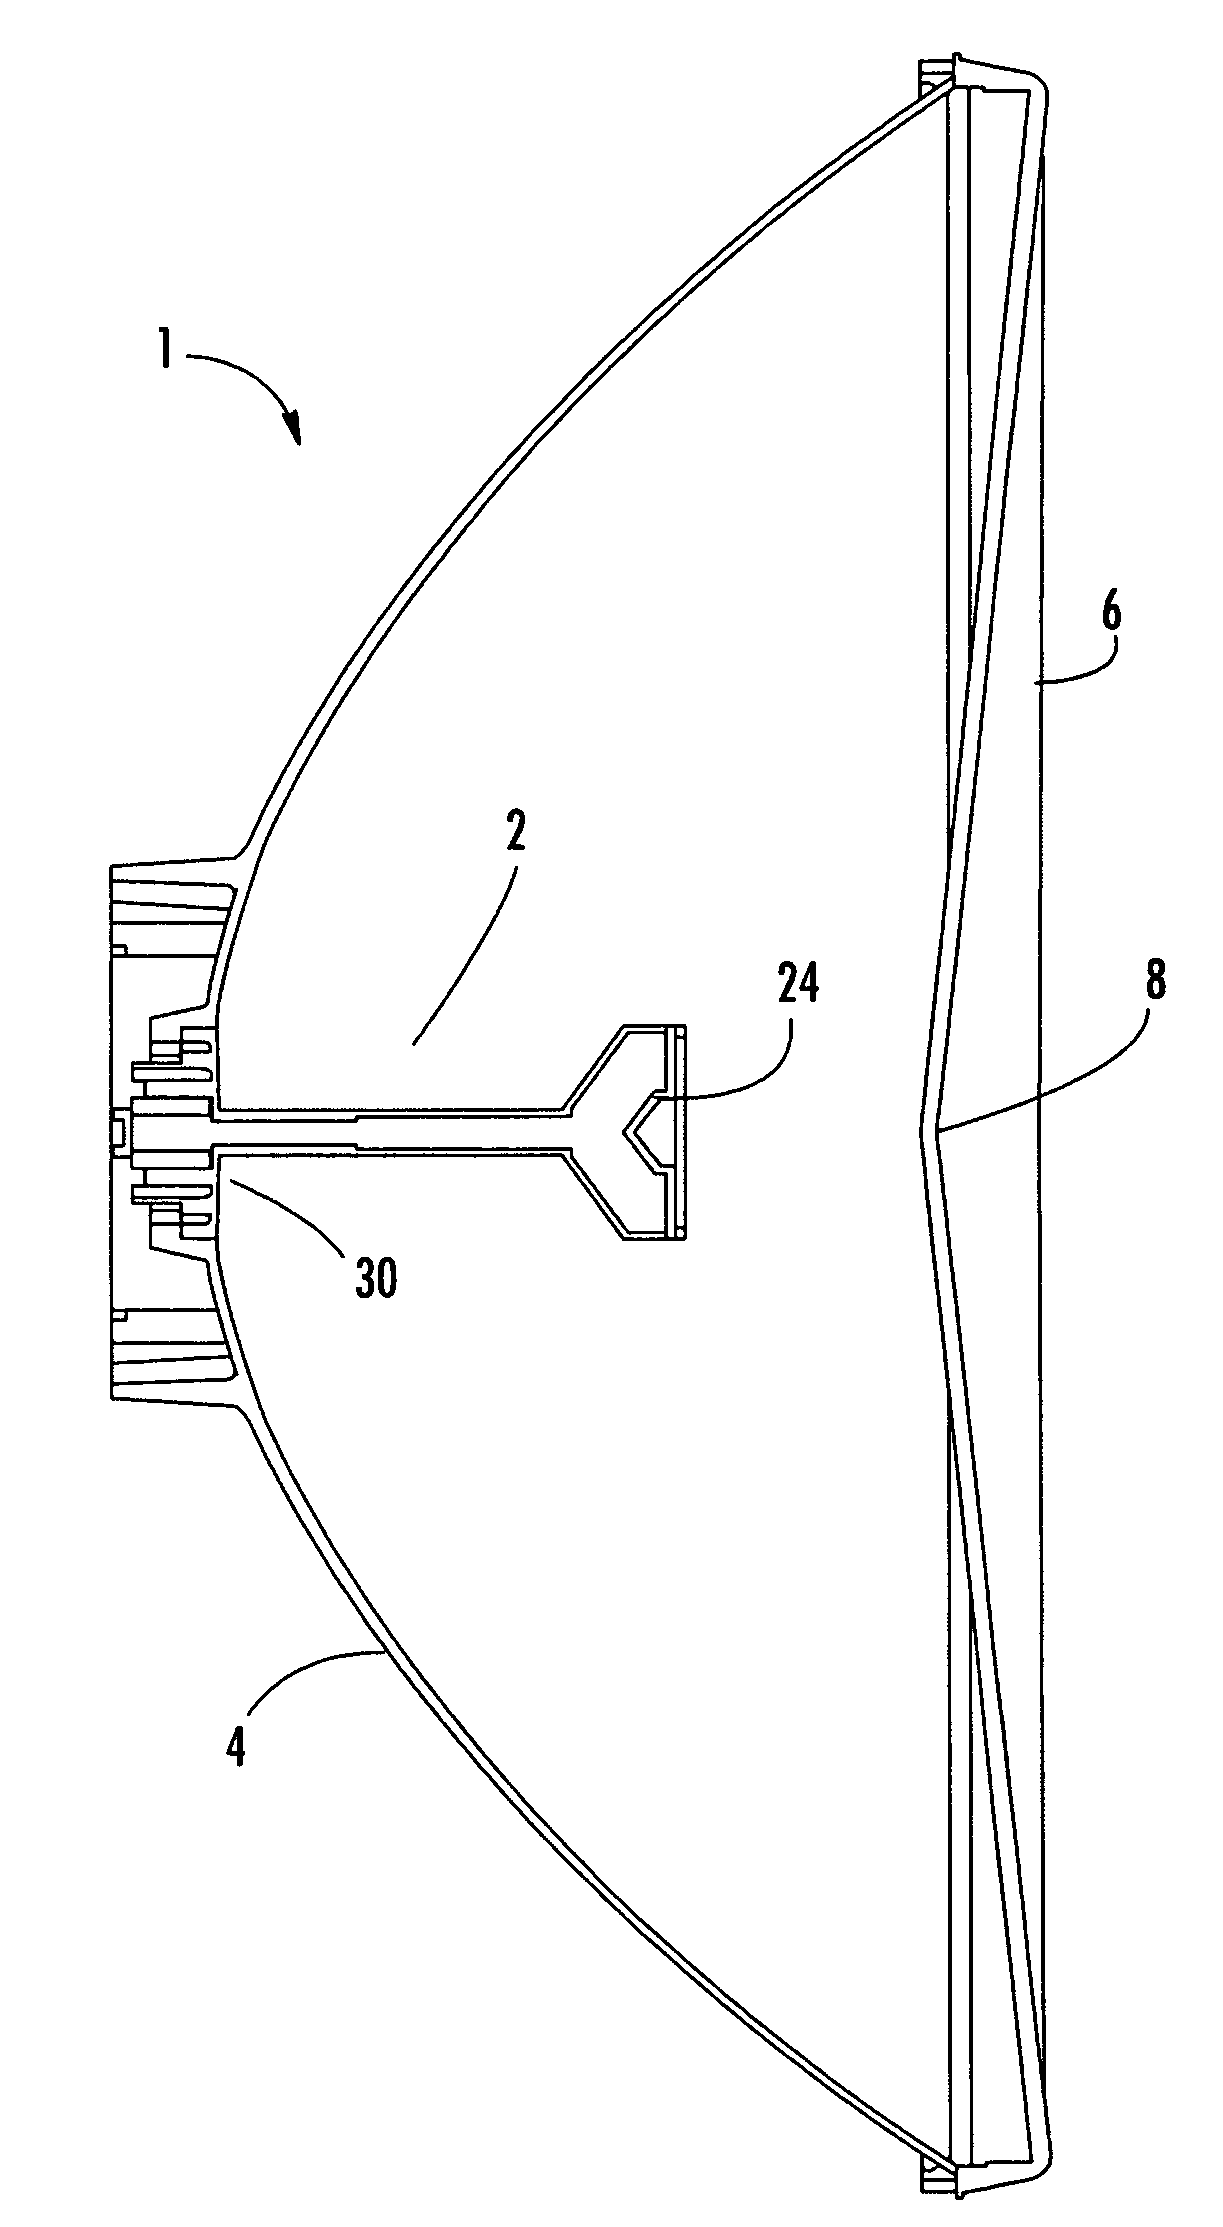 Reflector antenna with injection molded feed assembly